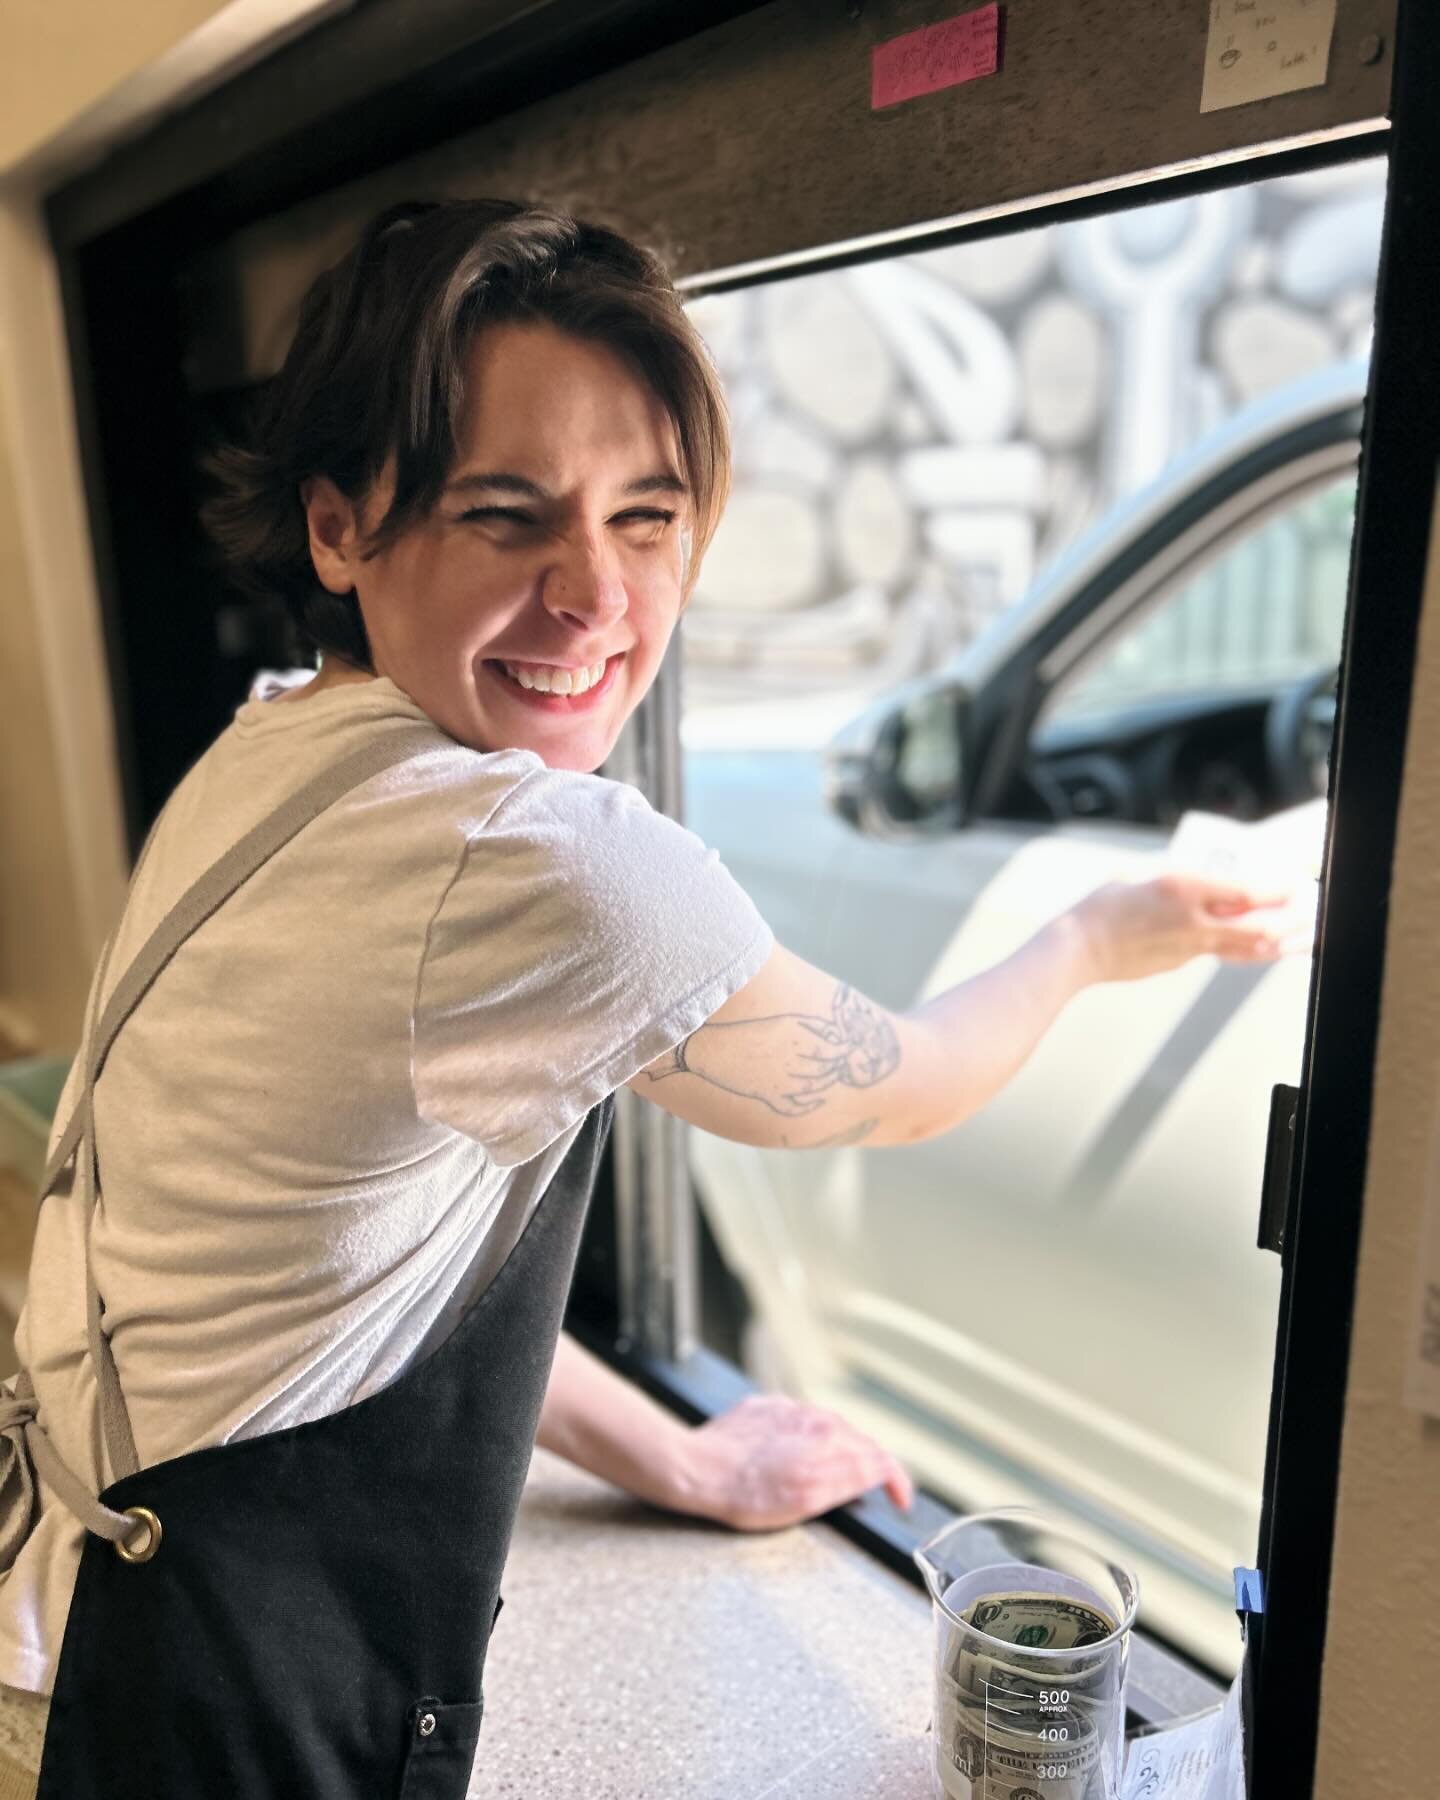 Let&rsquo;s welcome Lou, Alla Prima&rsquo;s newest addition to the fam! Not only is Lou an incredible roaster, but she has some mad barista skills, too! And if reading is your thing, Lou can give you some pretty serious book recommendations. Thank yo